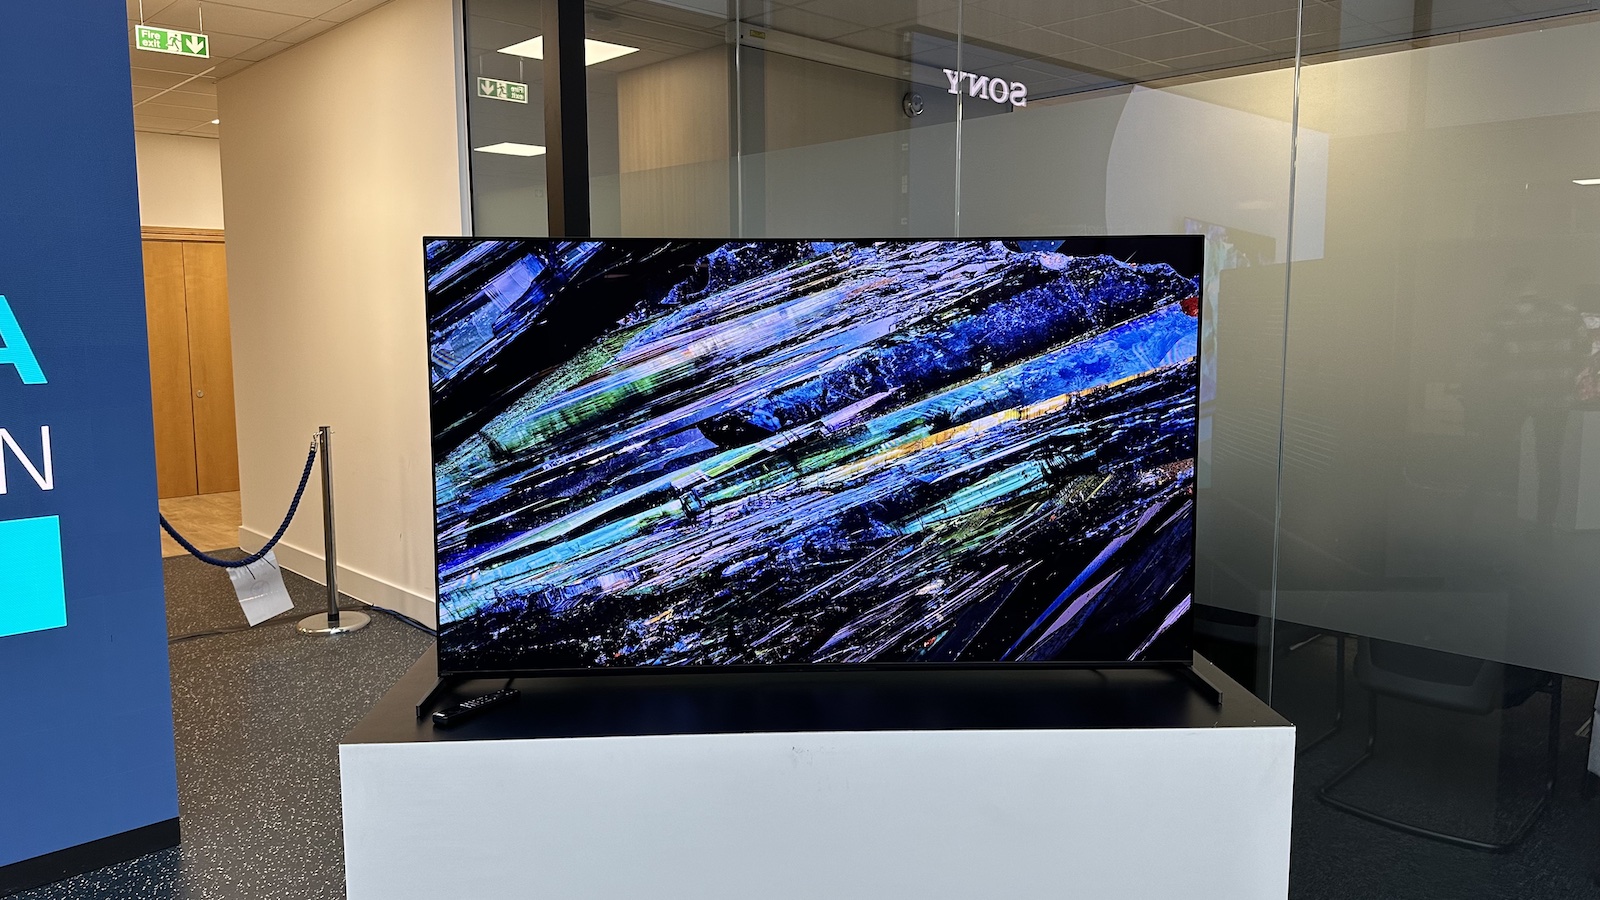 Sony's new A95L QD-OLED TV supports 4K/120Hz Dolby Vision gaming